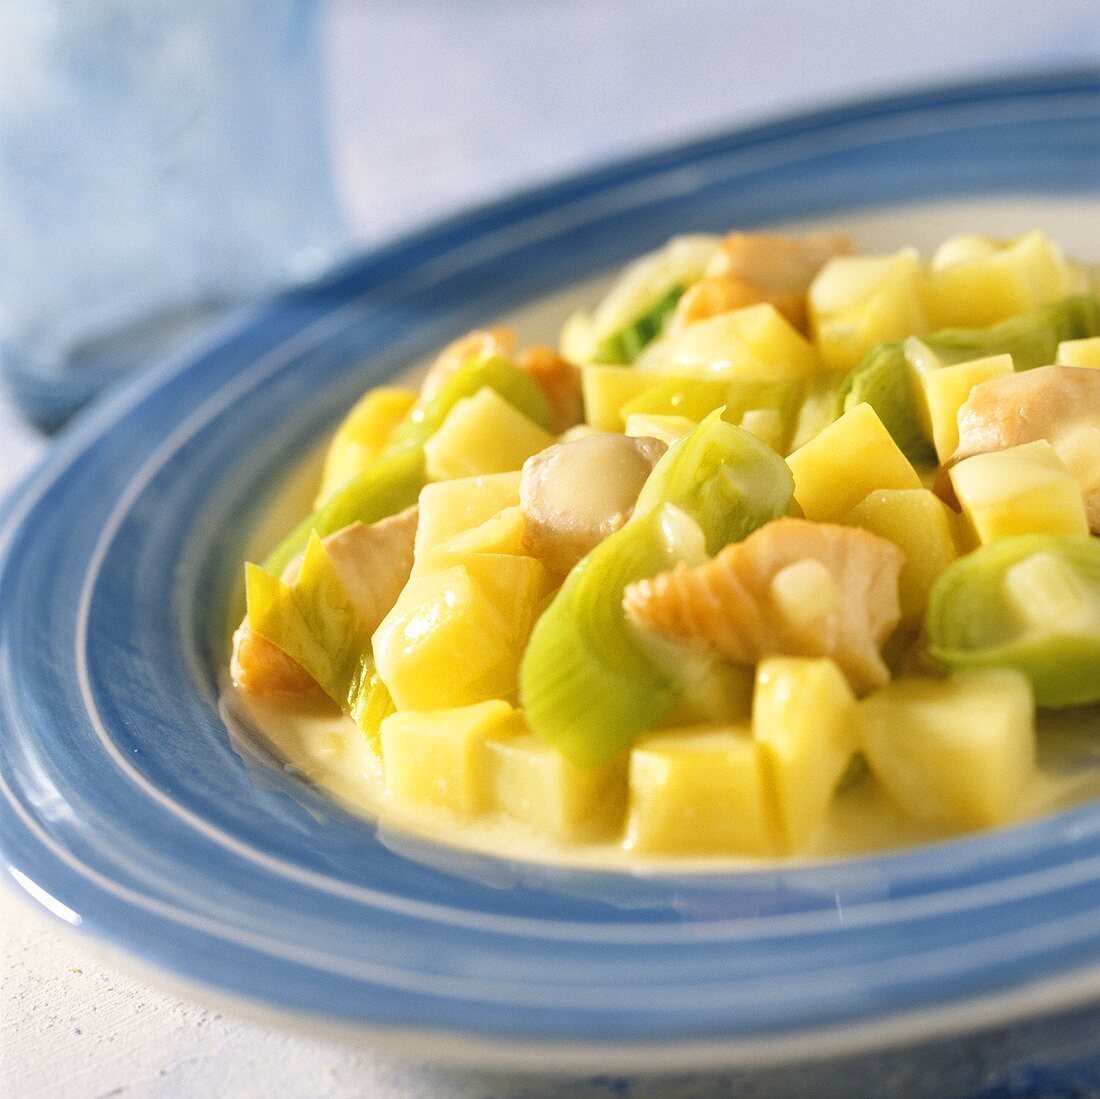 Potato and fish ragout with leeks on plate